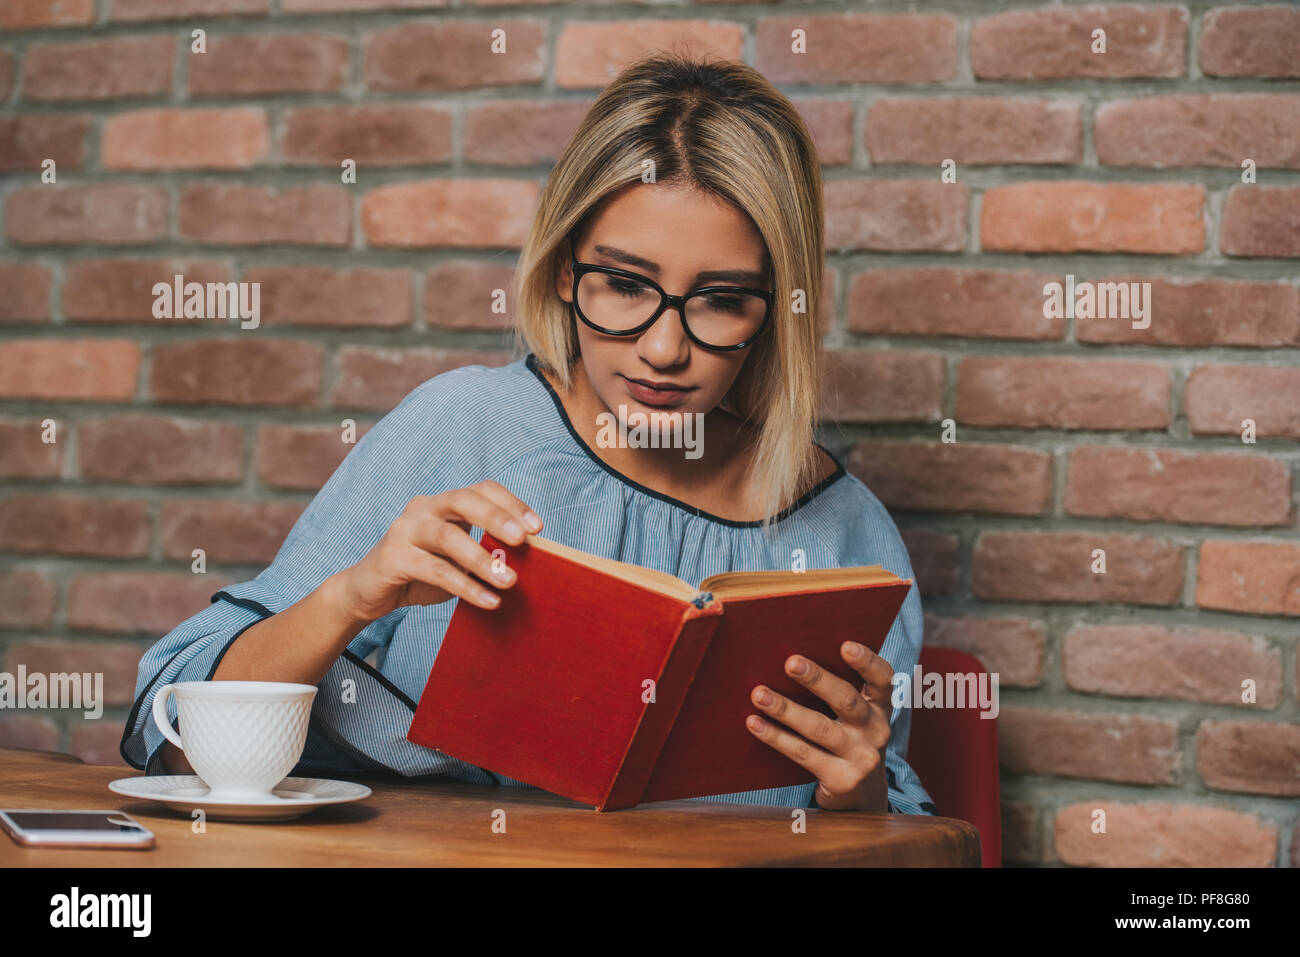 Woman sitting at a table reading a novel book. Stock Photo